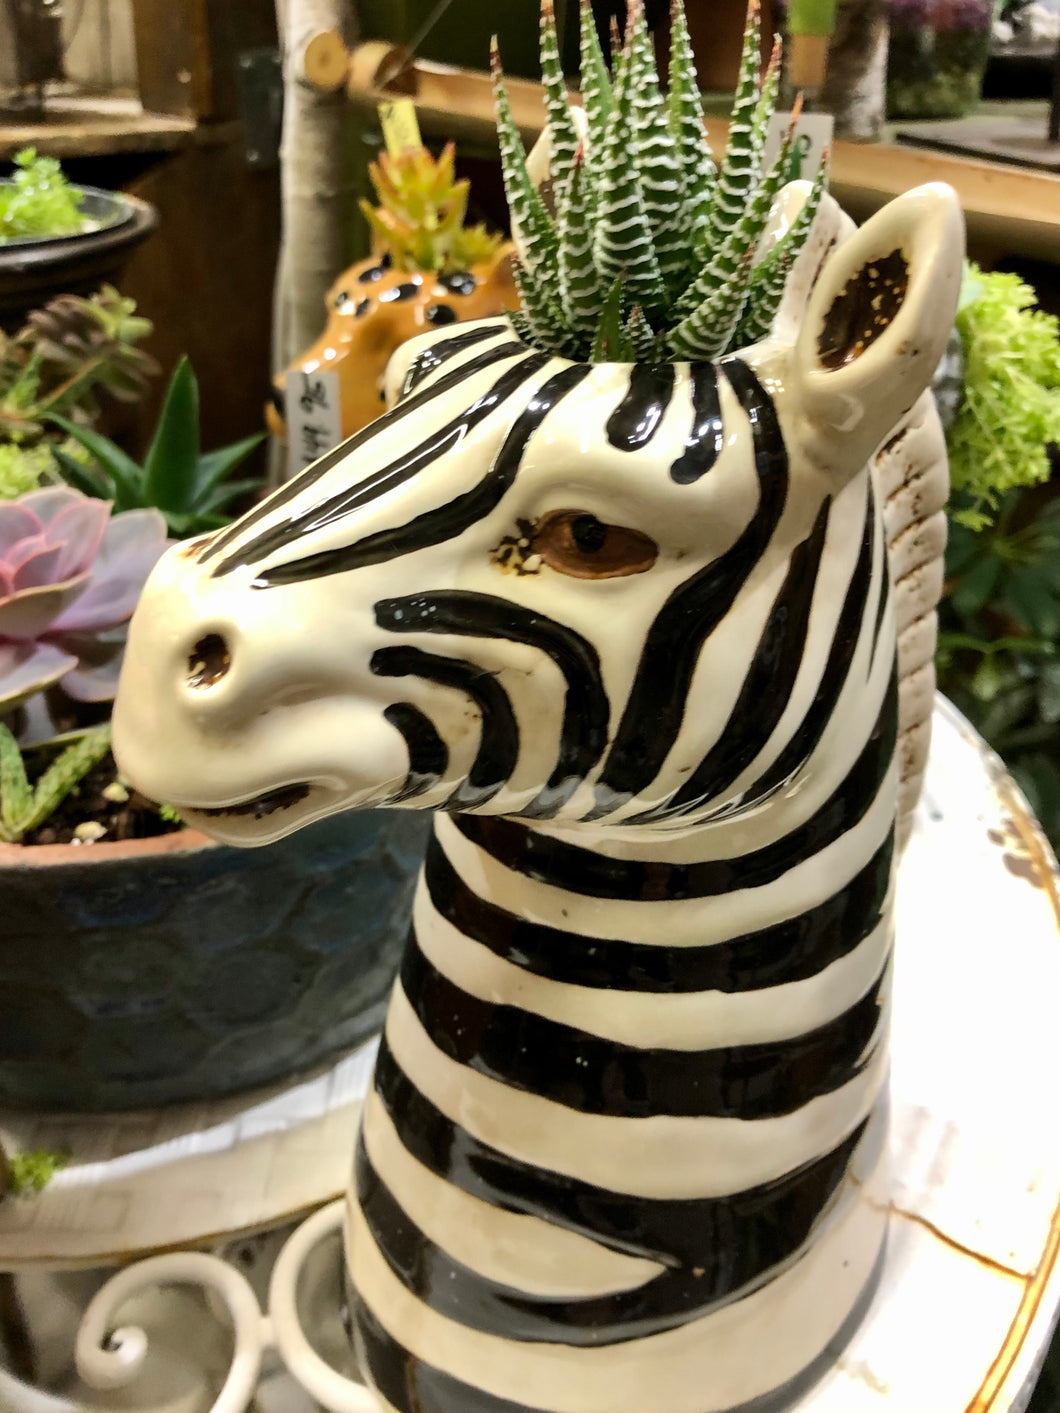 TALL CERAMIC ZEBRA HEAD PLANTER FOR AIR PLANTS OR SUCCULENTS. 9” TALL BY 5.5” WIDE BY 8.5” DEEP WITH OPENING OF 1.5” | NO DRAINAGE | COLORING IS WHITE WITH BLACK STRIPES | DETAILED FACE | HOLDING A GREEN WITH WHITE STRIPES SUCCULENT.